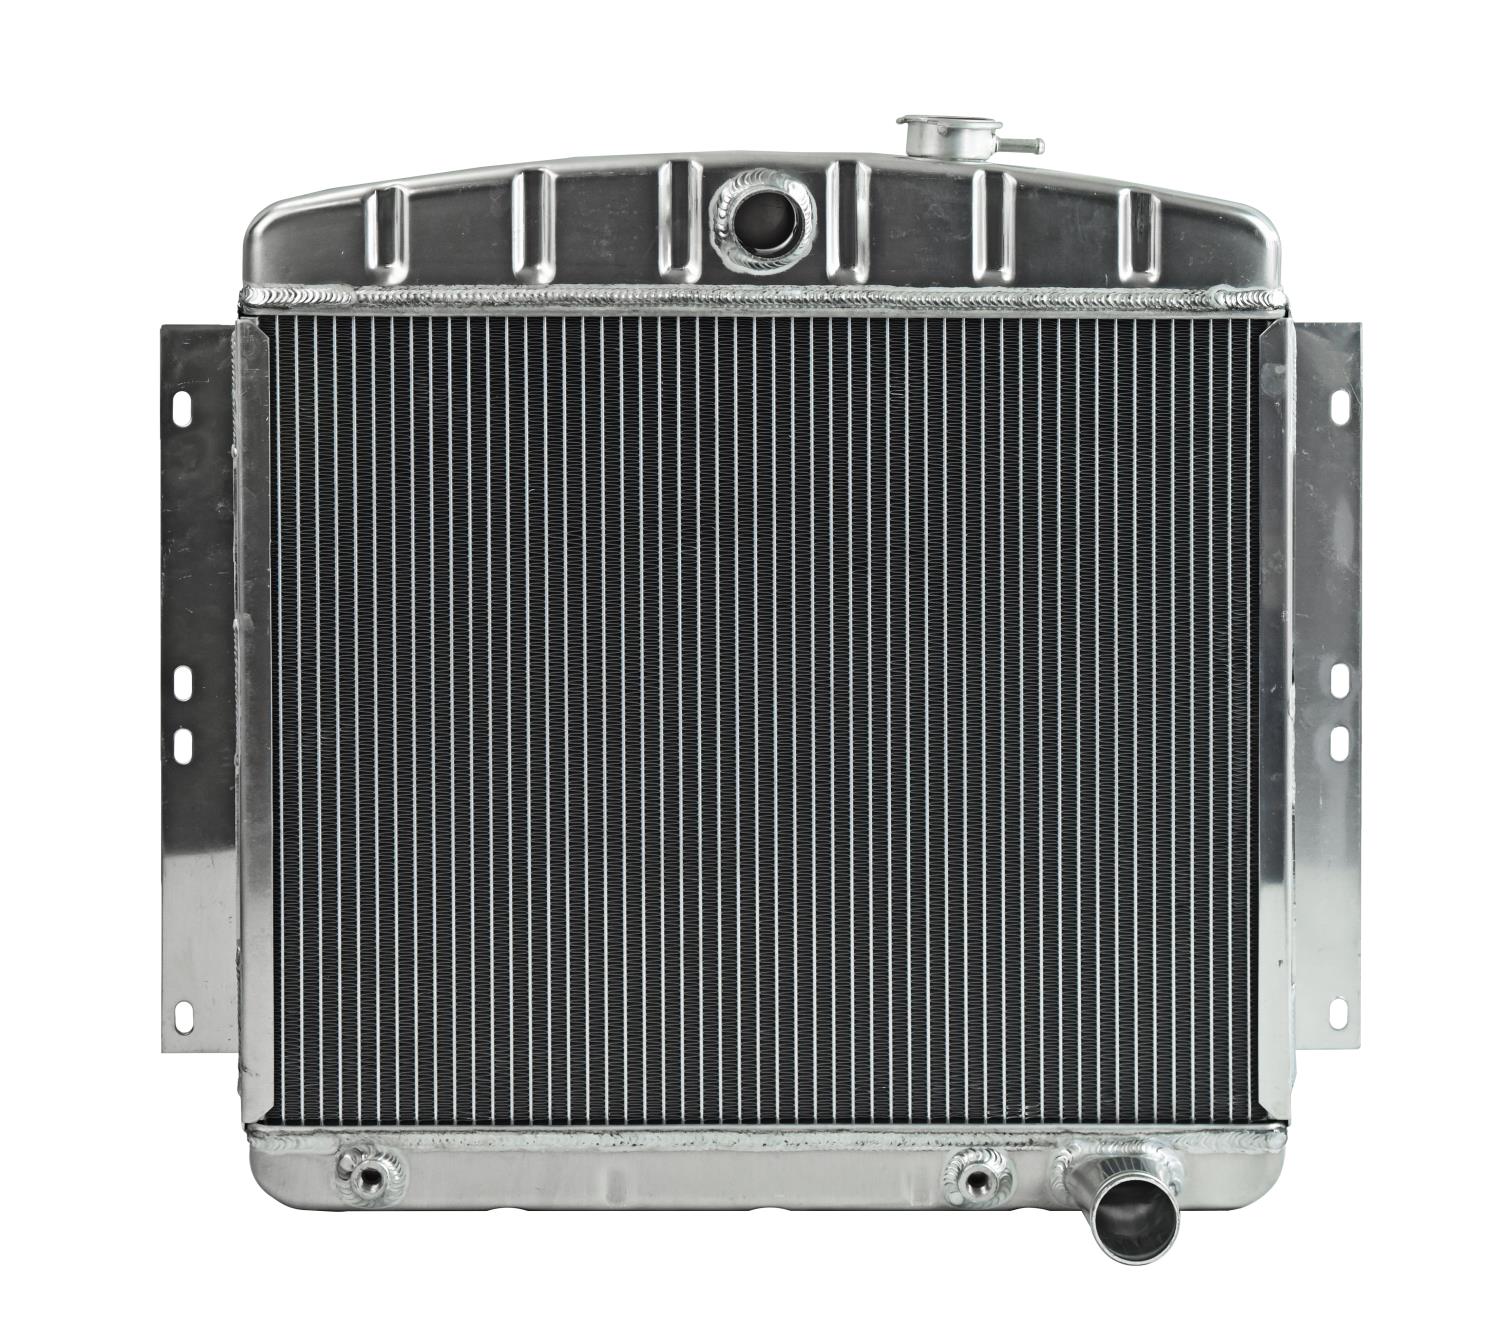 Aluminum Radiator for Select 1949-1954 Chevrolet Models w/ Chevy V8 Engine Conversion